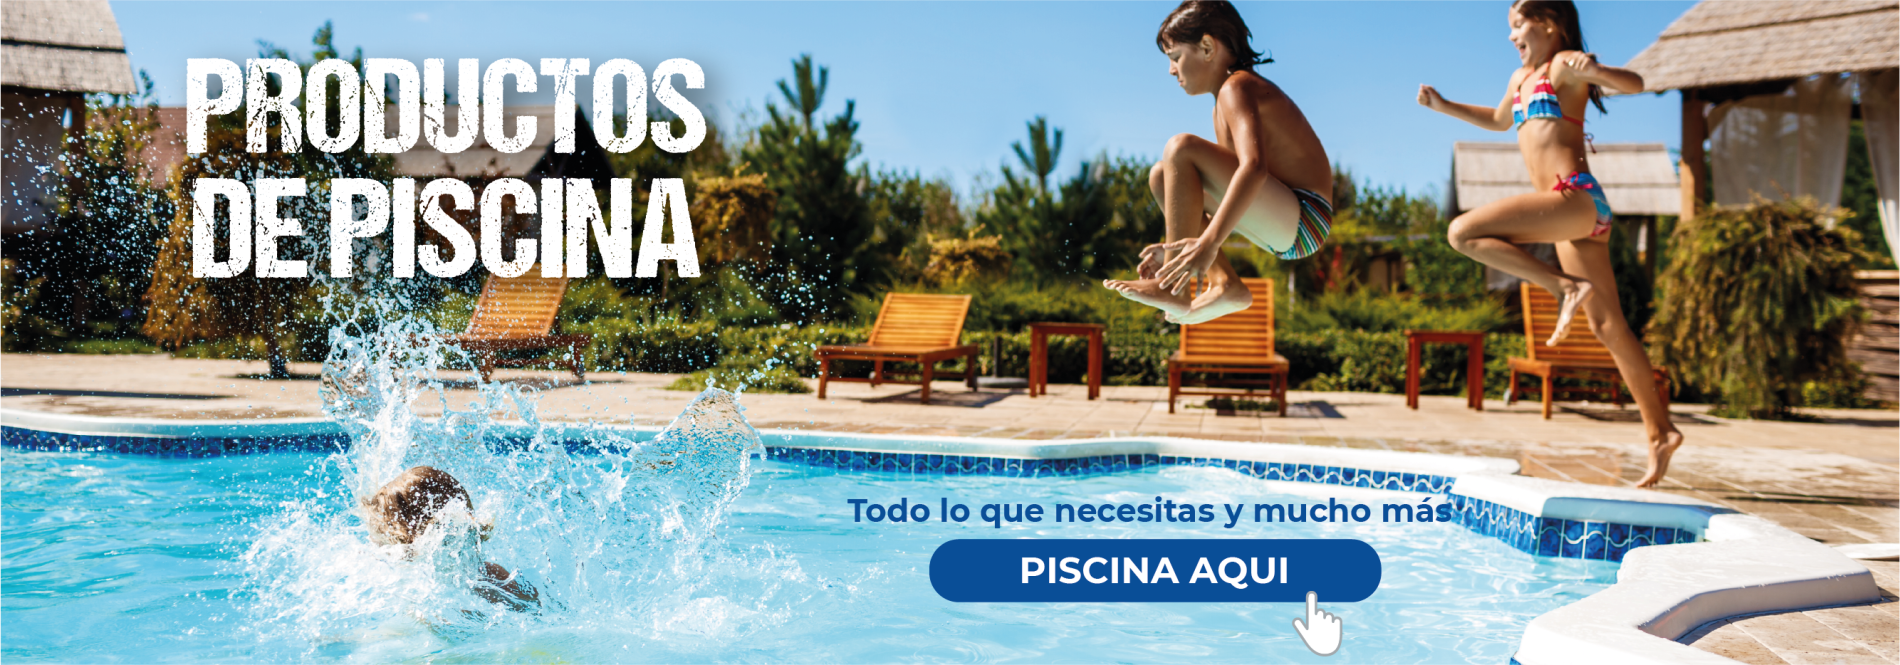 Banner PRODUCTOS PISCINA